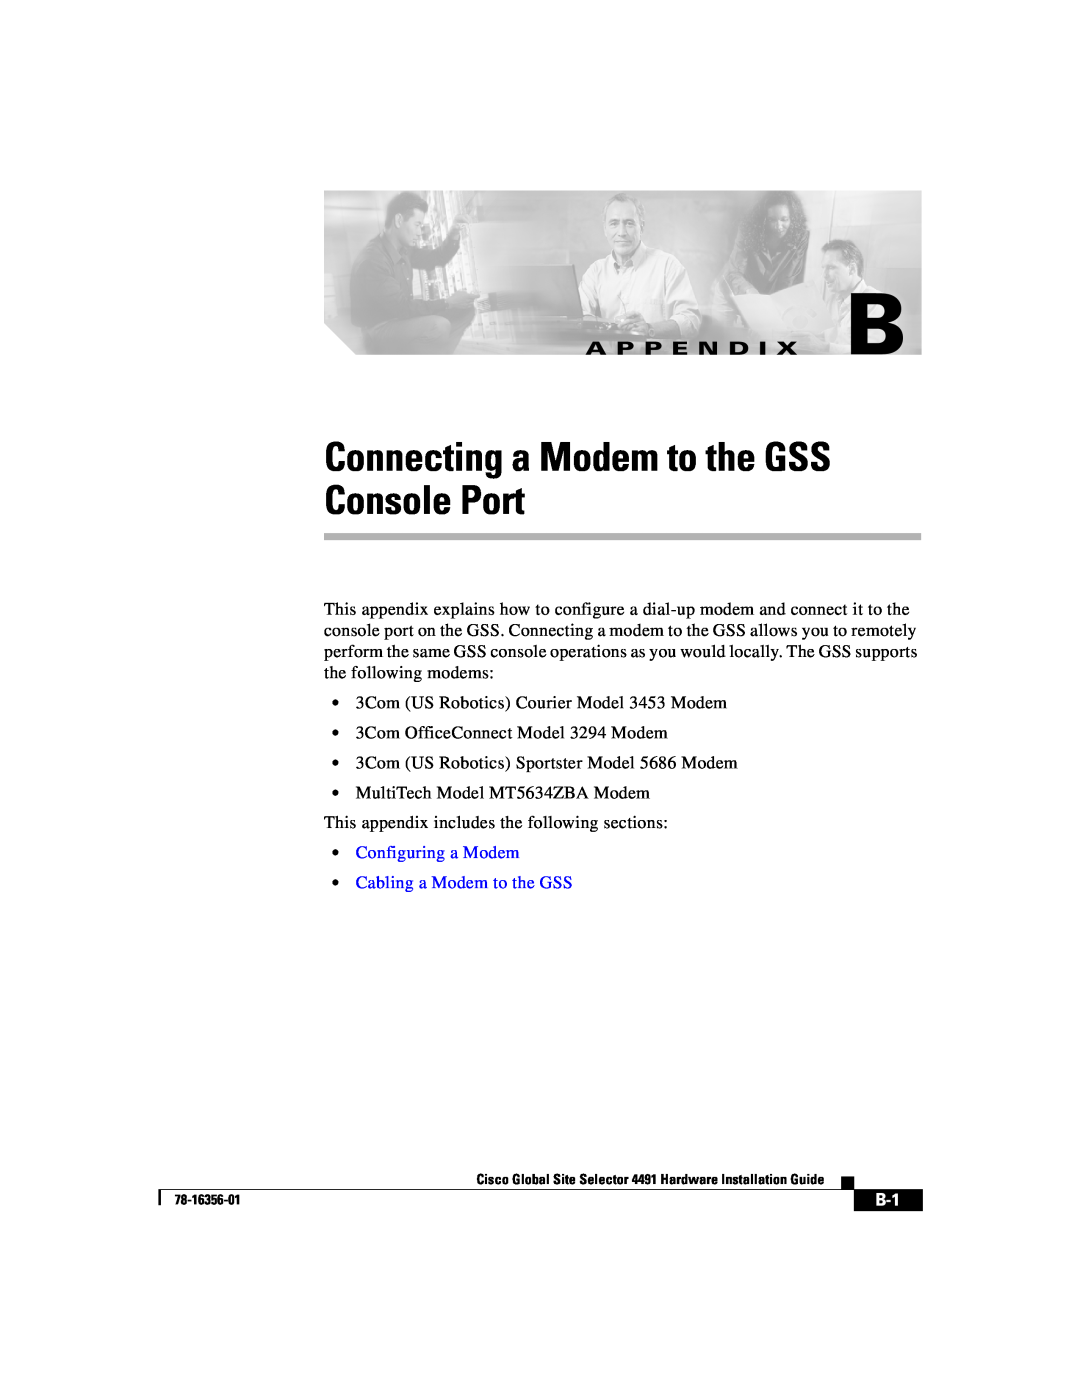 Cisco Systems 78-16356-01 manual Connecting a Modem to the GSS Console Port, A P P E N D I X B 